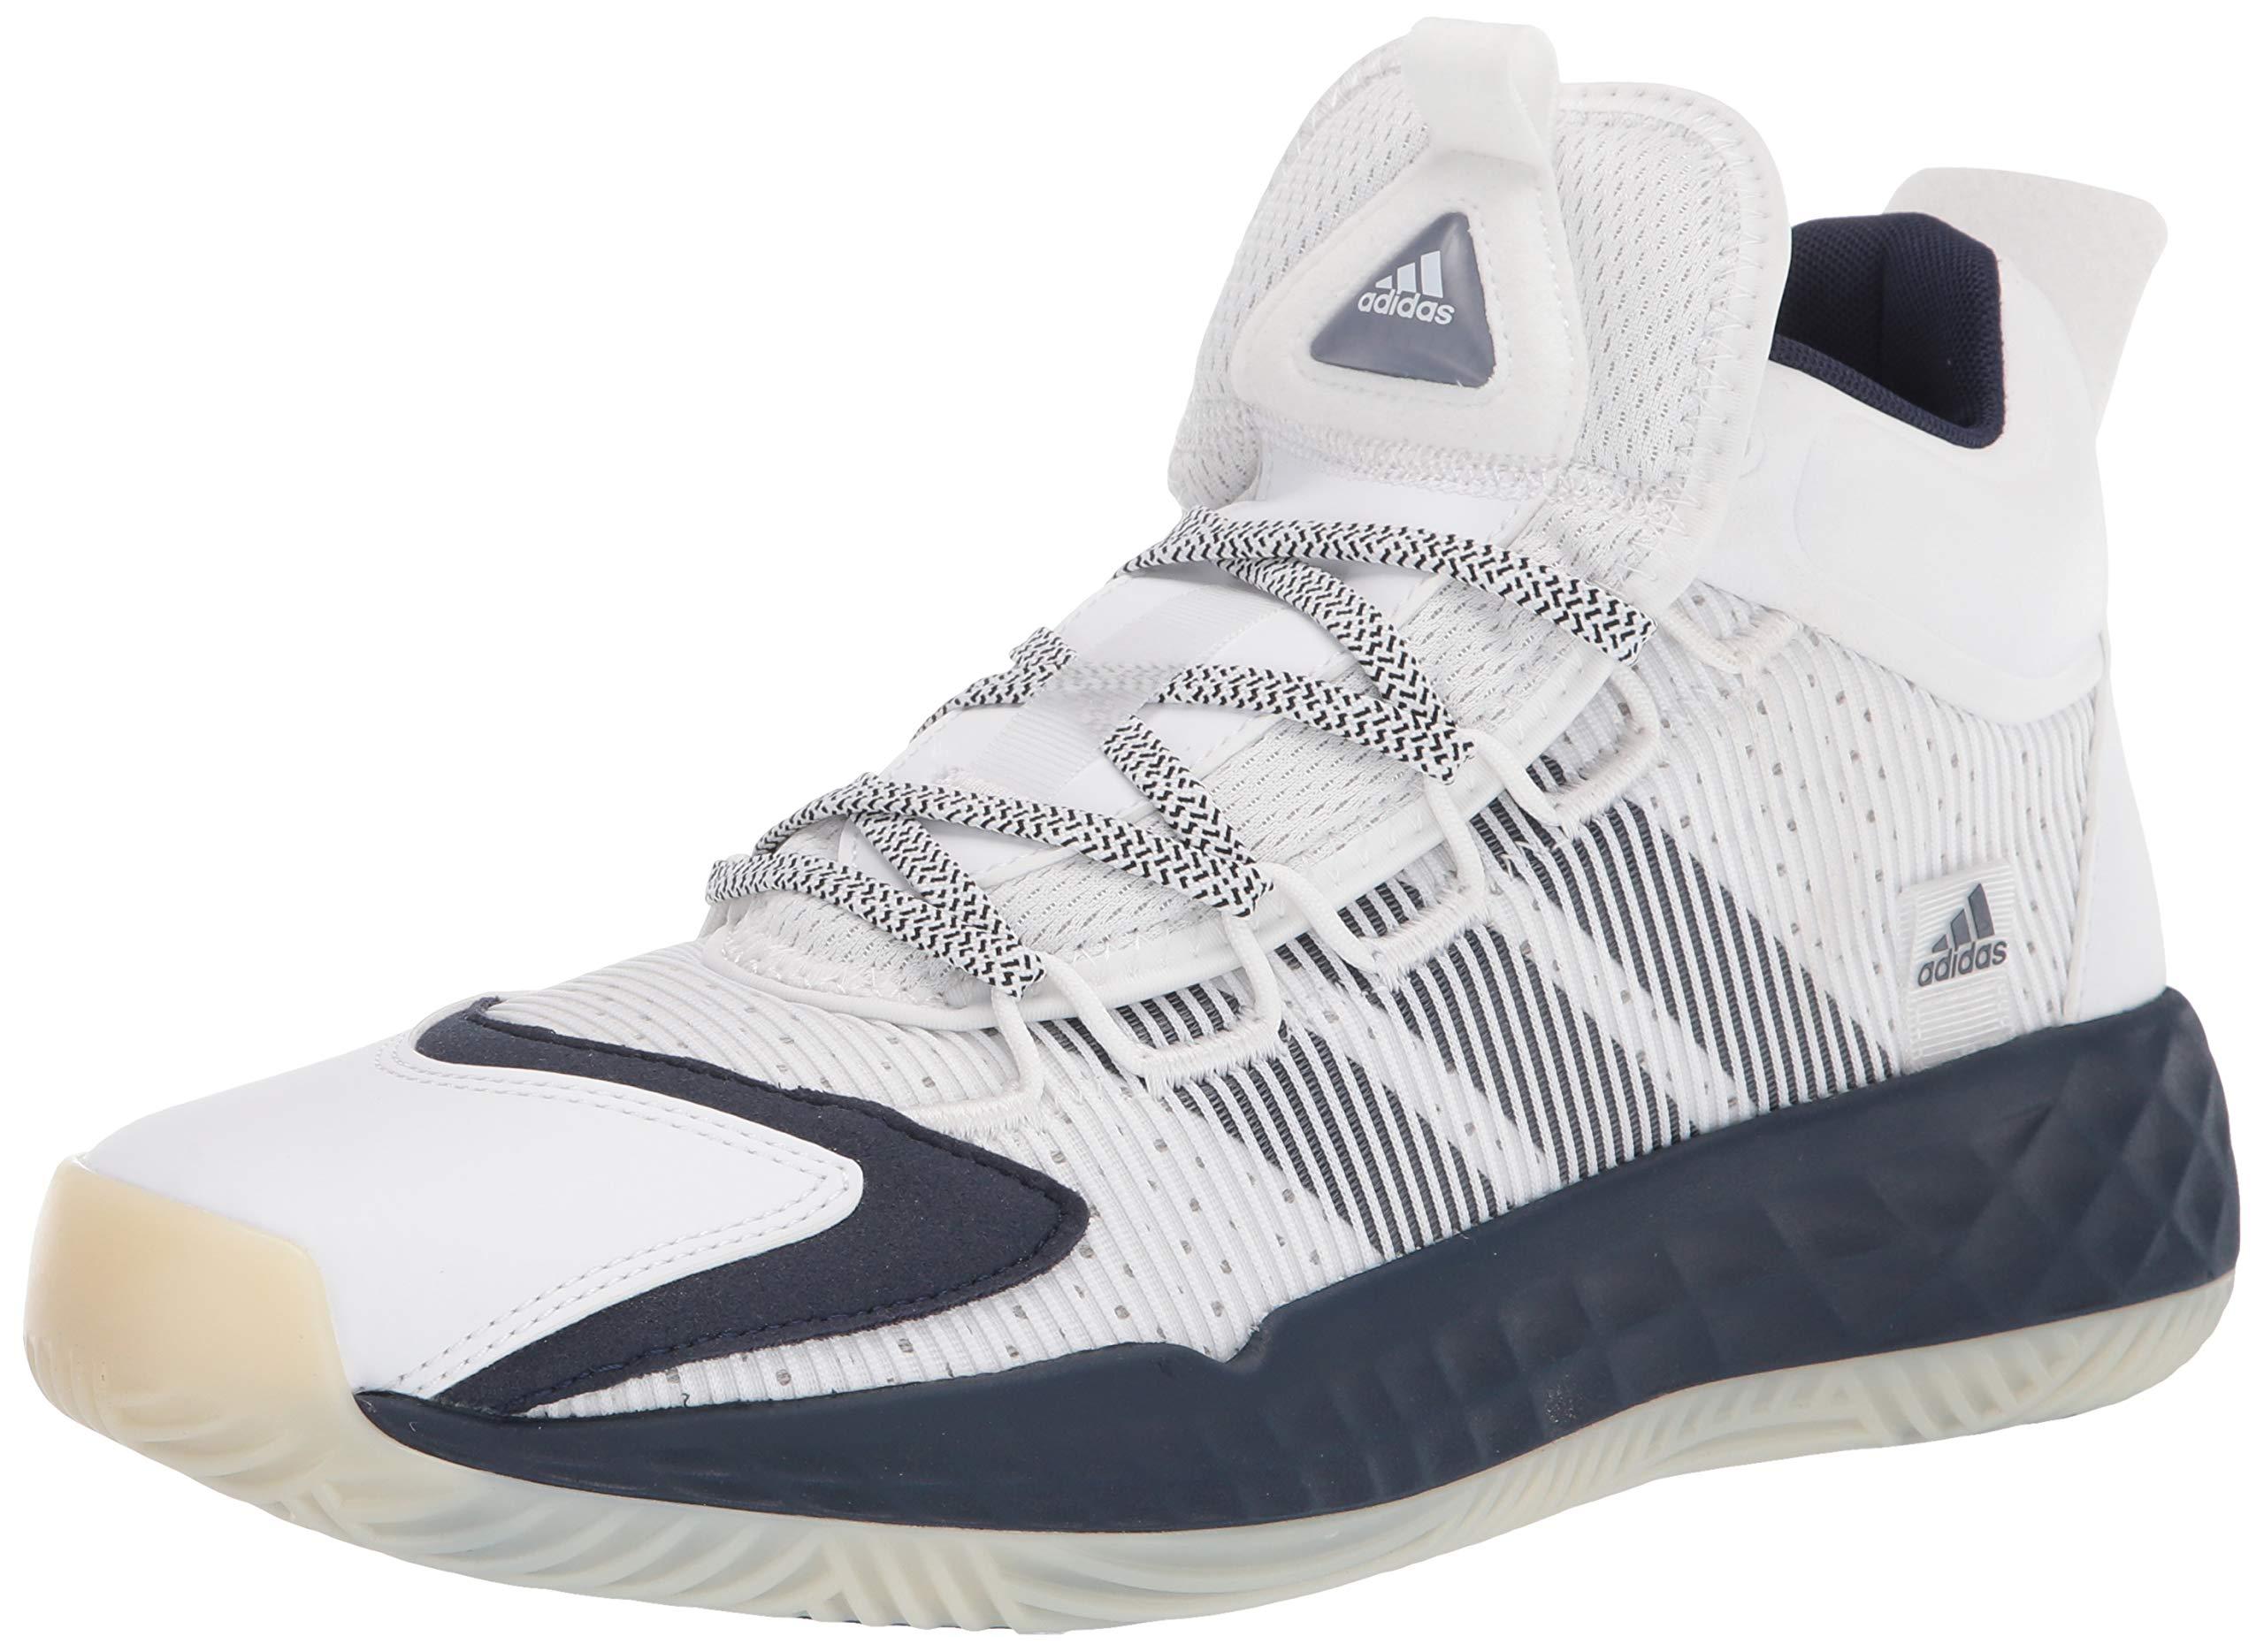 adidas Coll3ctiv3 2020 Mid Basketball Shoe in Navy Blue/White/Black ...